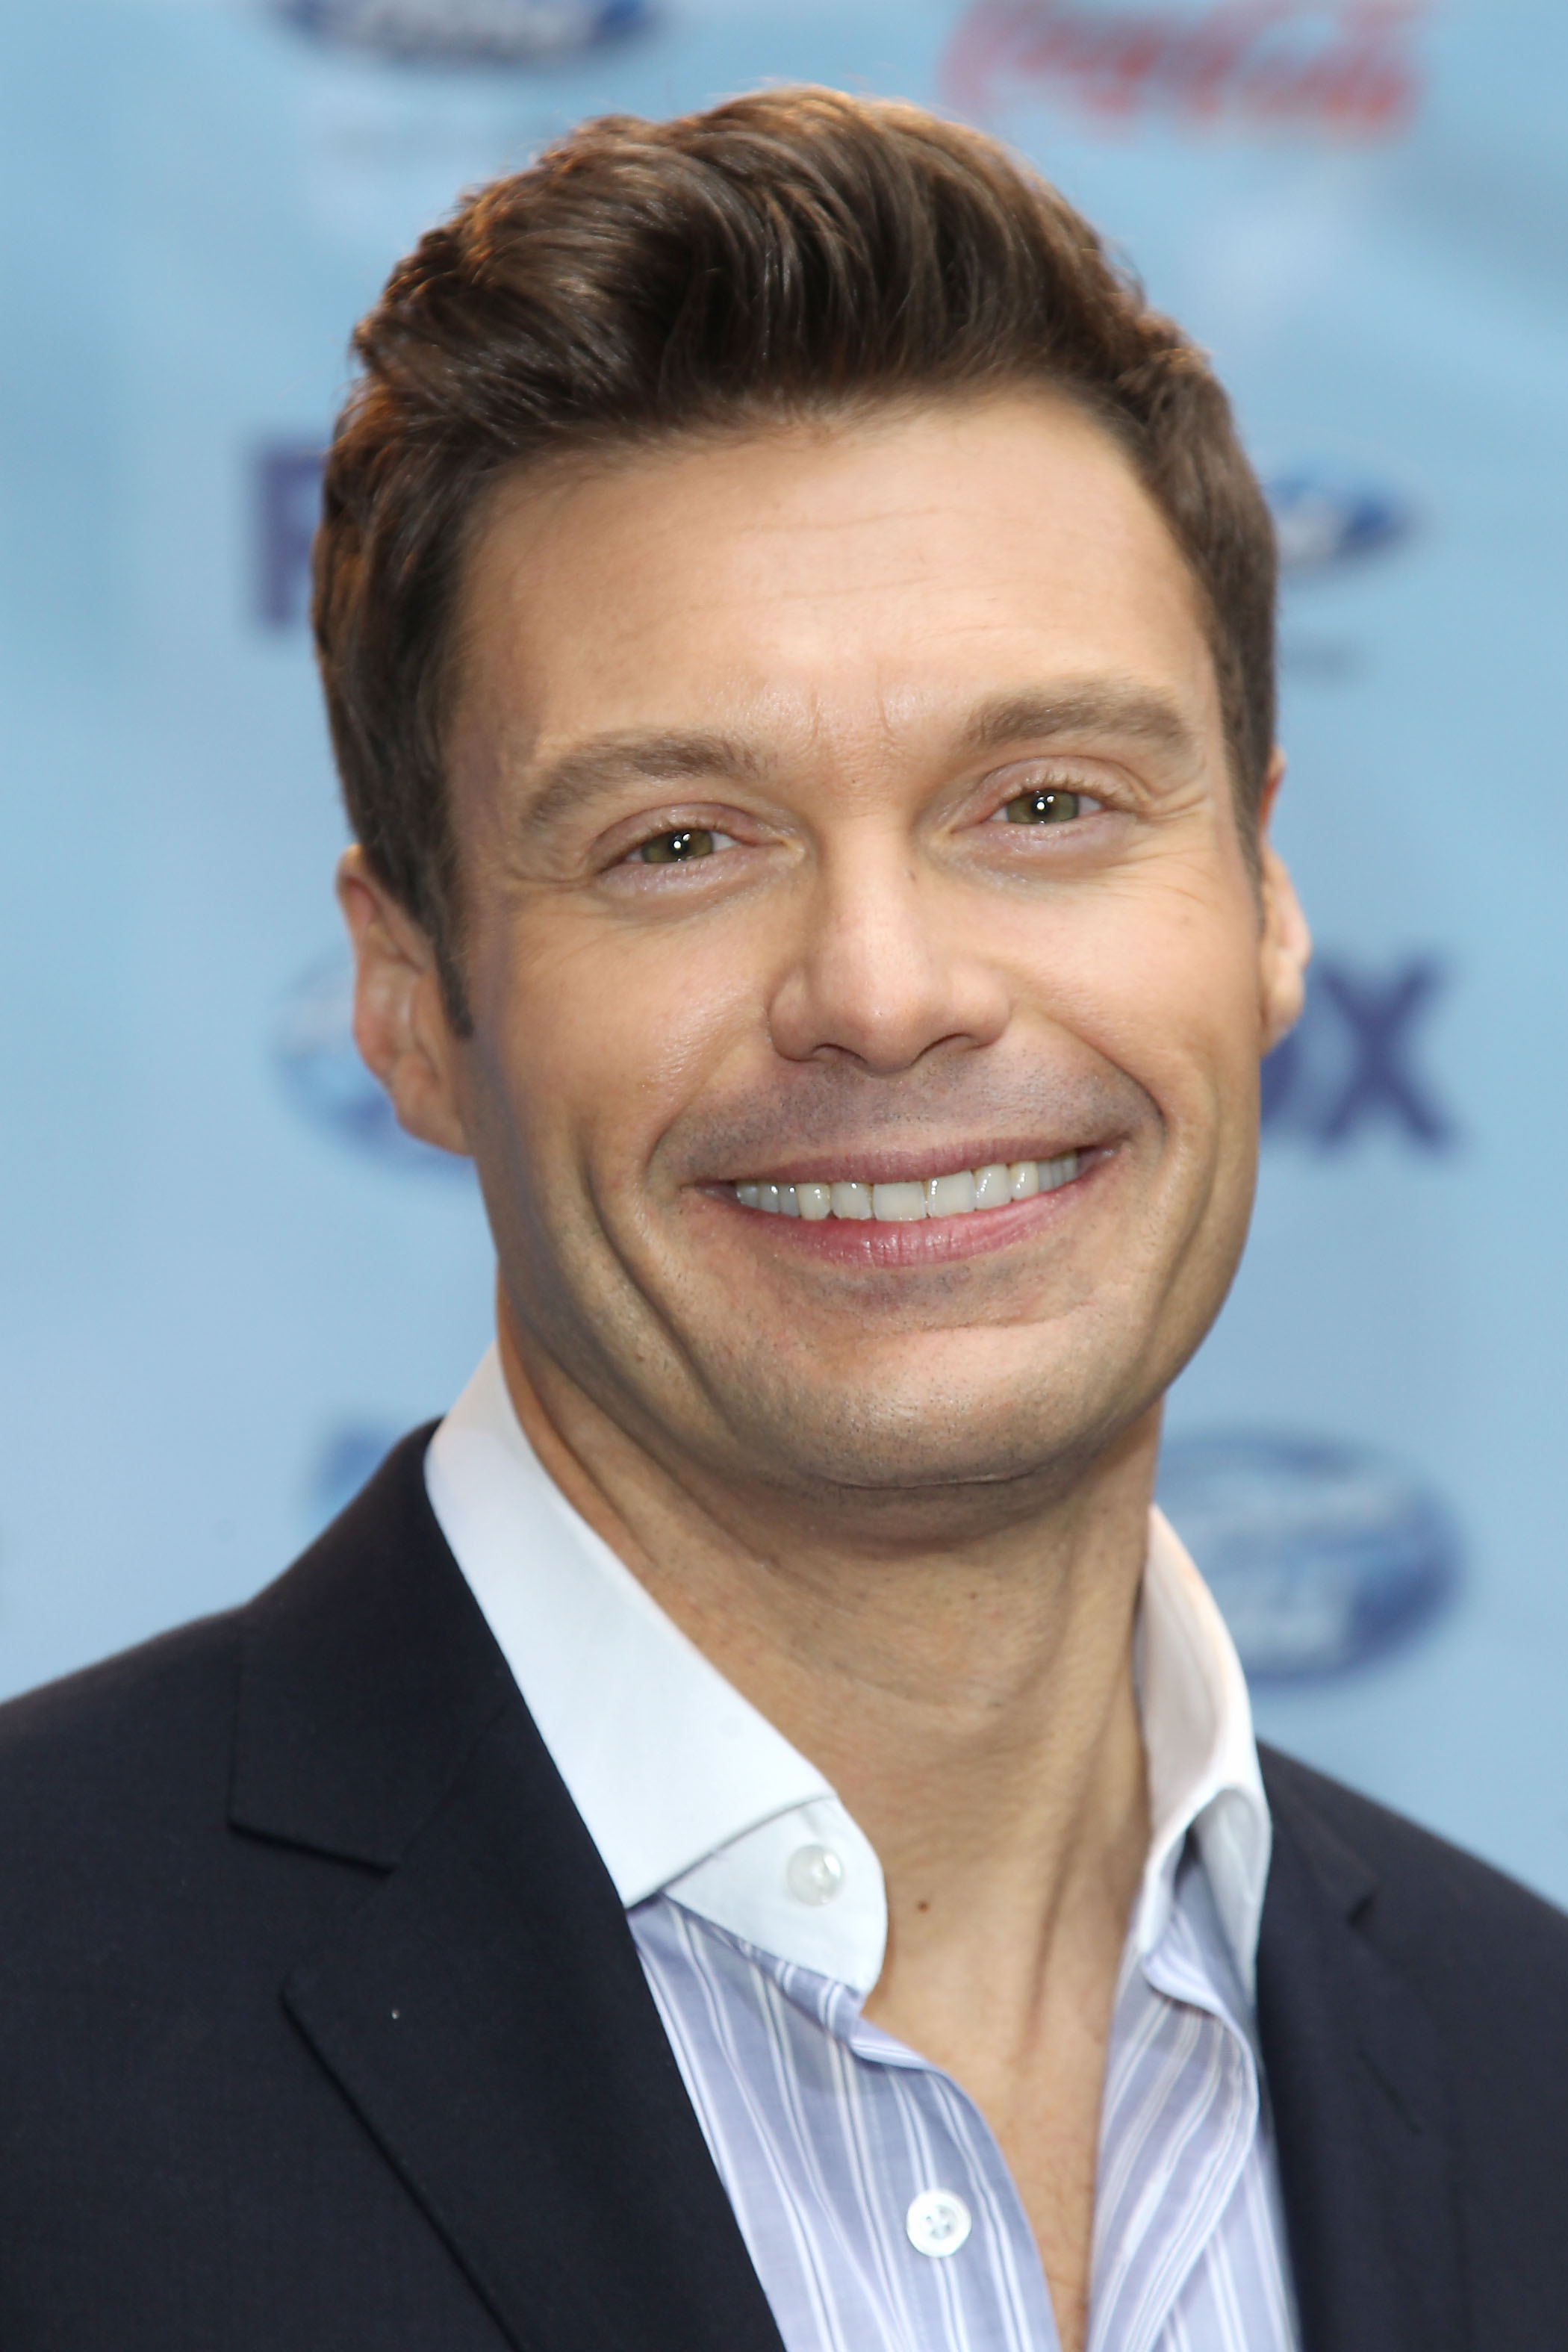 Ryan Seacrest to host new NBC game show - The Blade